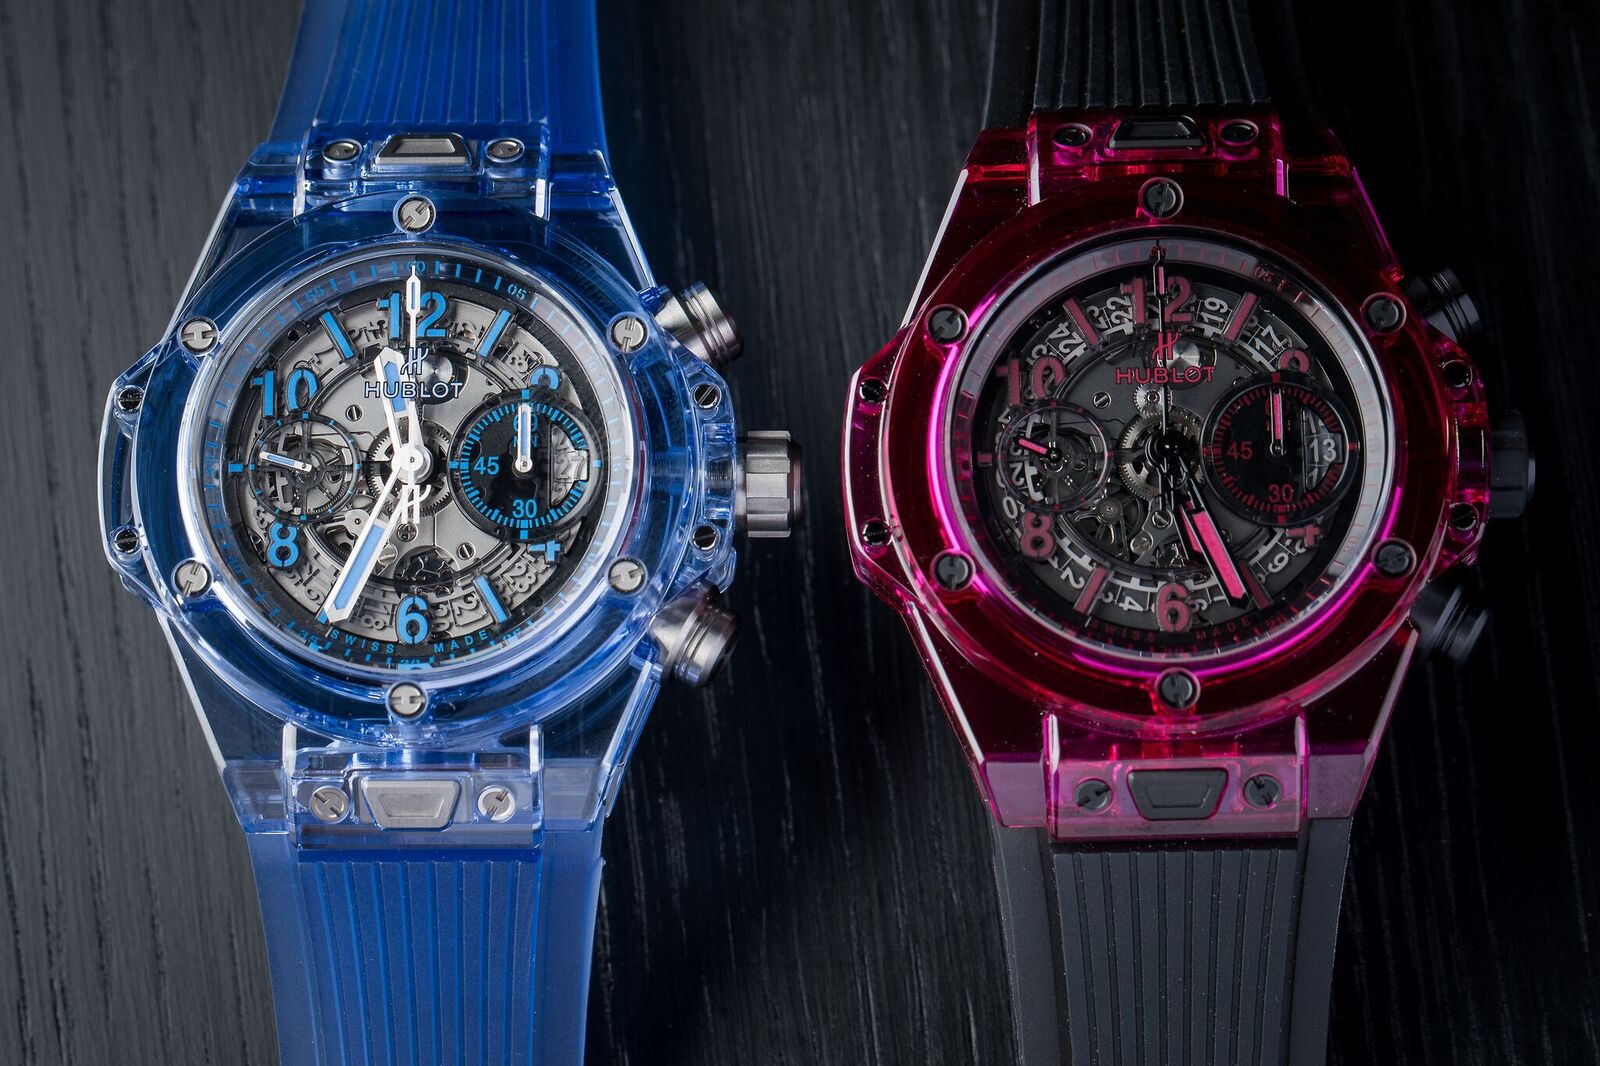 Hublot Takes The Art of Fusion To The Text Level With Colored Sapphire